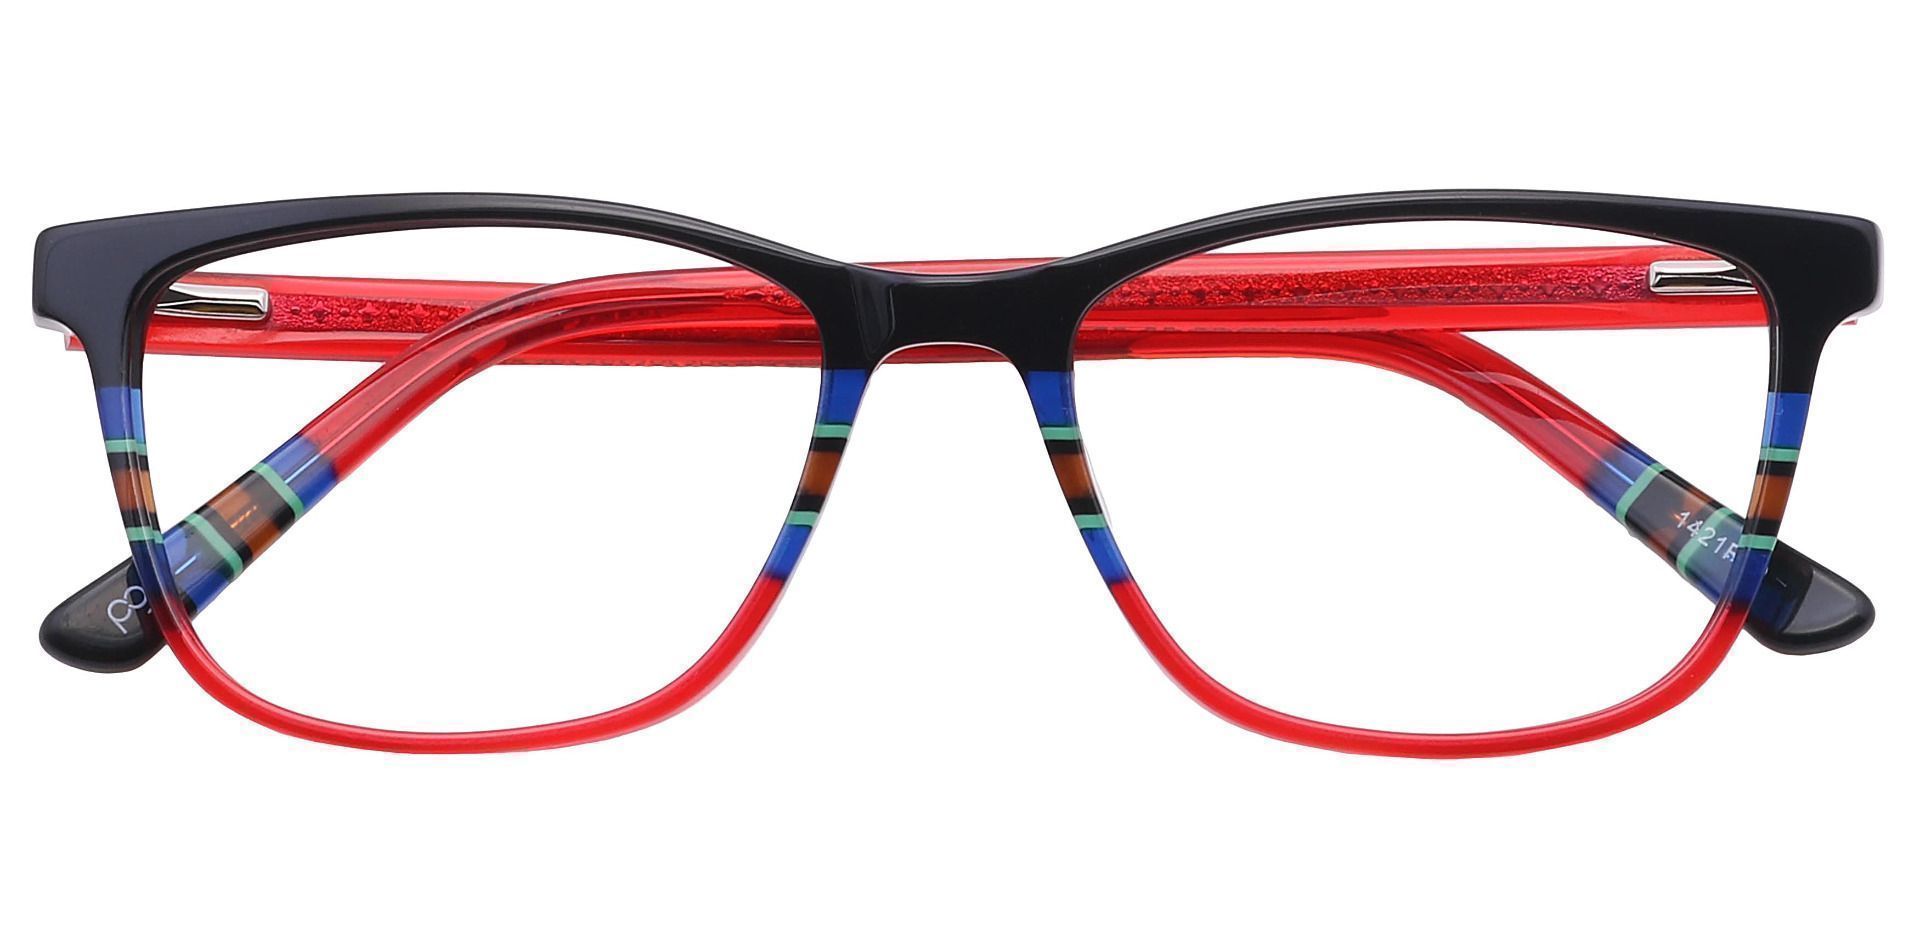 Taffie Oval Non-Rx Glasses - Red